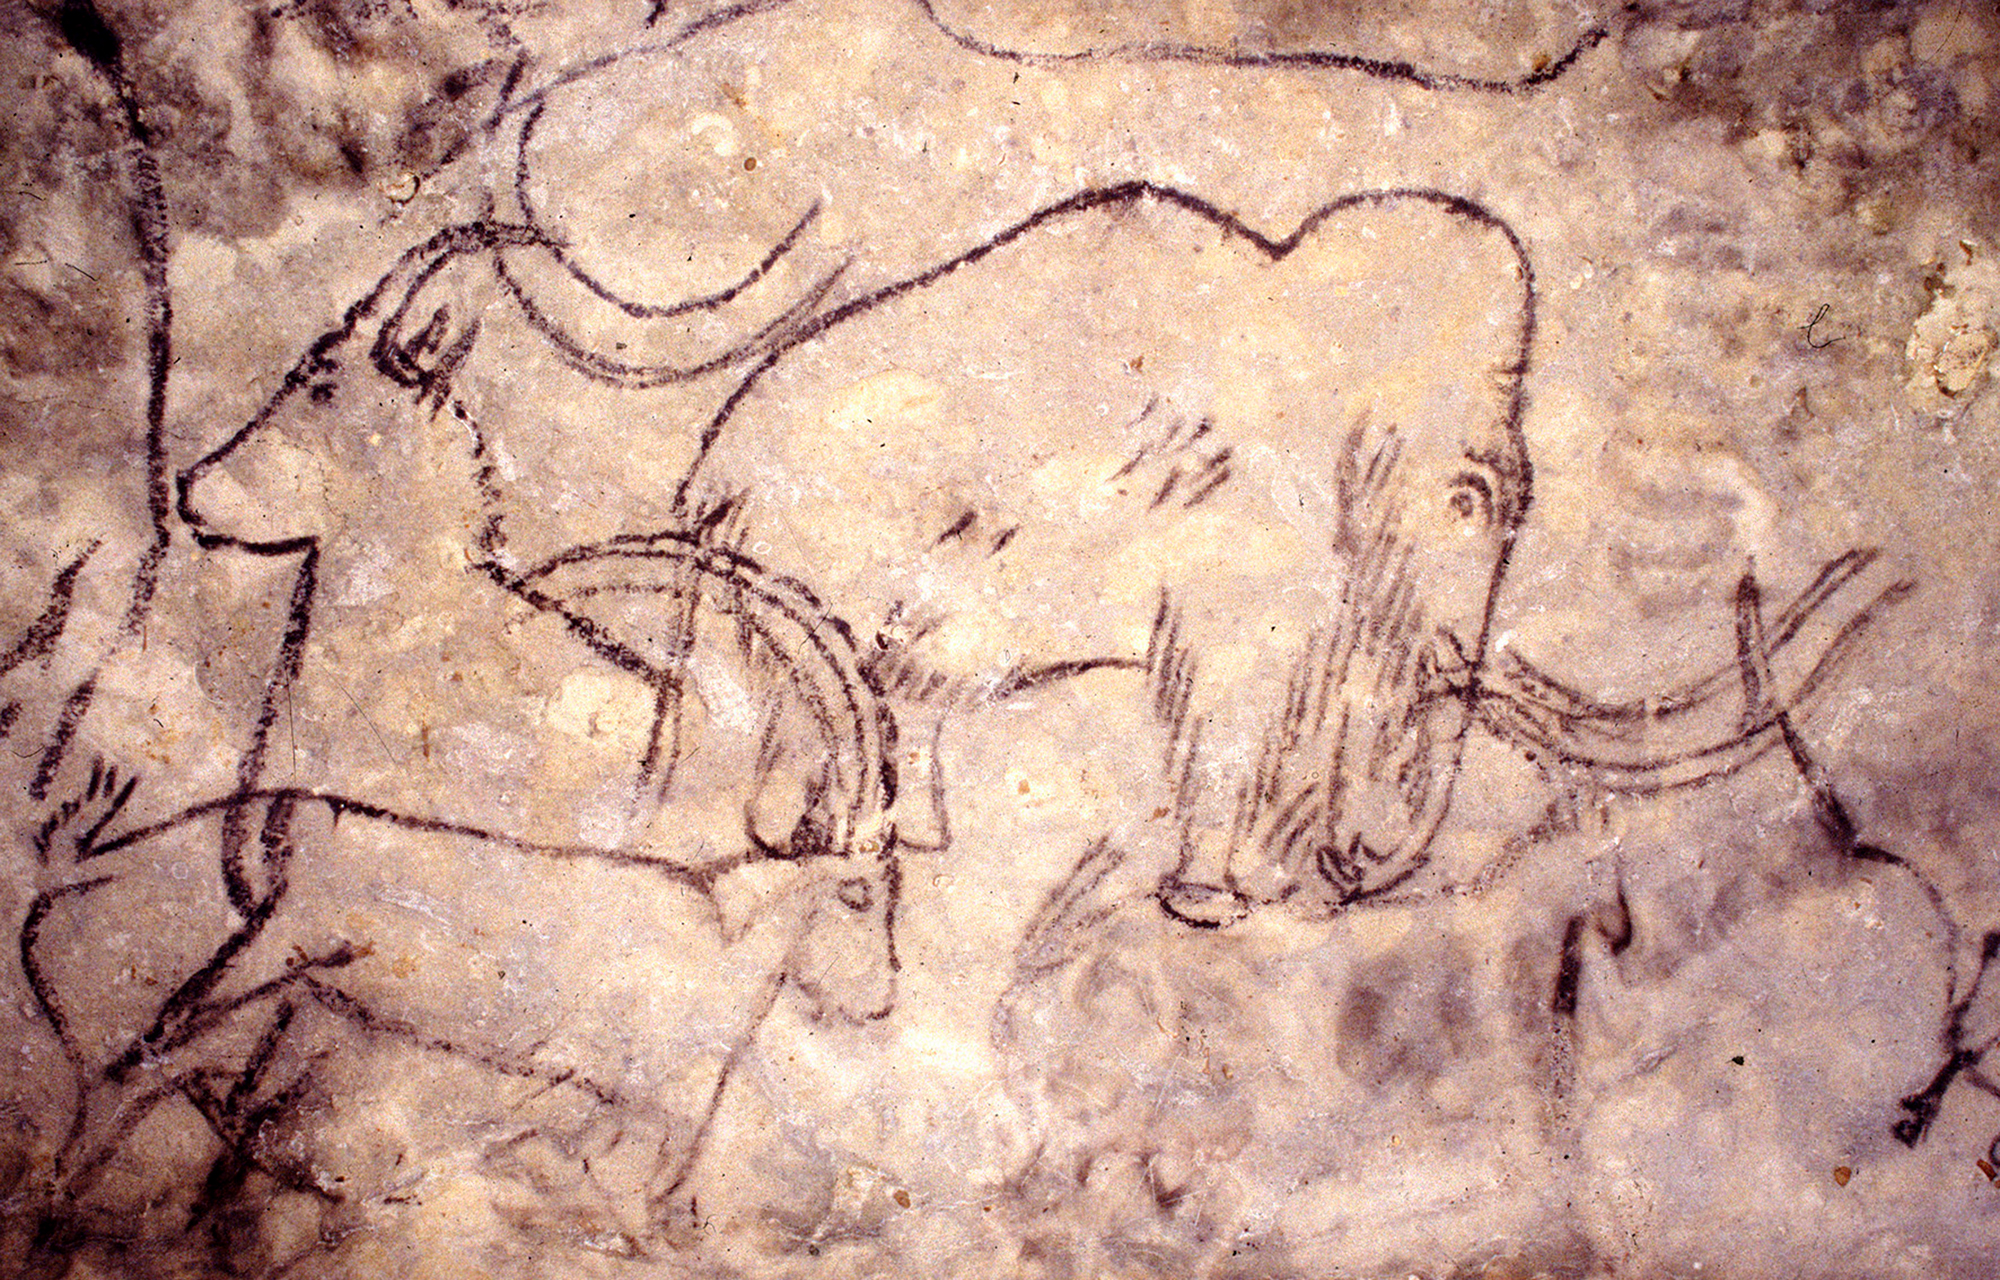 Rouffignac is notable for its proportion of representations of mammoths